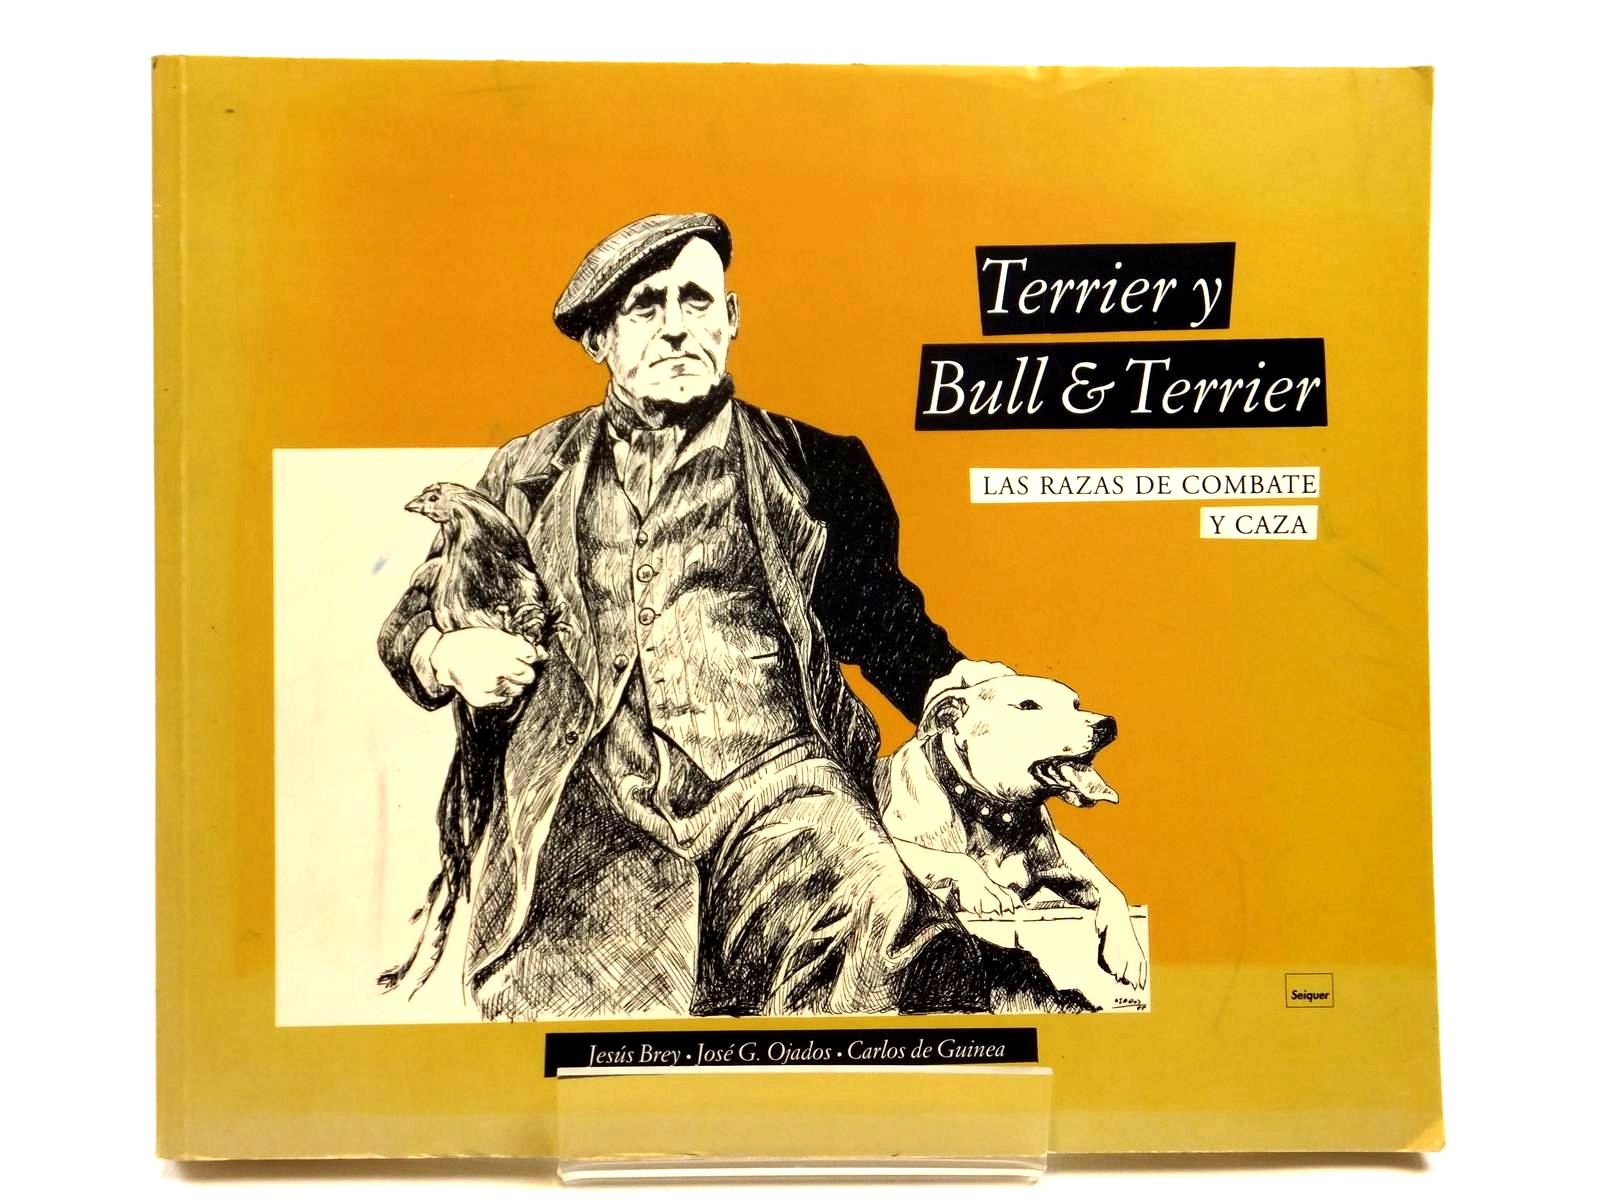 Photo of TERRIER Y BULL &amp; TERRIER LAS RAZAS DE COMBATE Y CAZA written by Brey, Jesus De Guinea, Carlos illustrated by Ojados, Jose G. published by Seiquer (STOCK CODE: 2121439)  for sale by Stella & Rose's Books